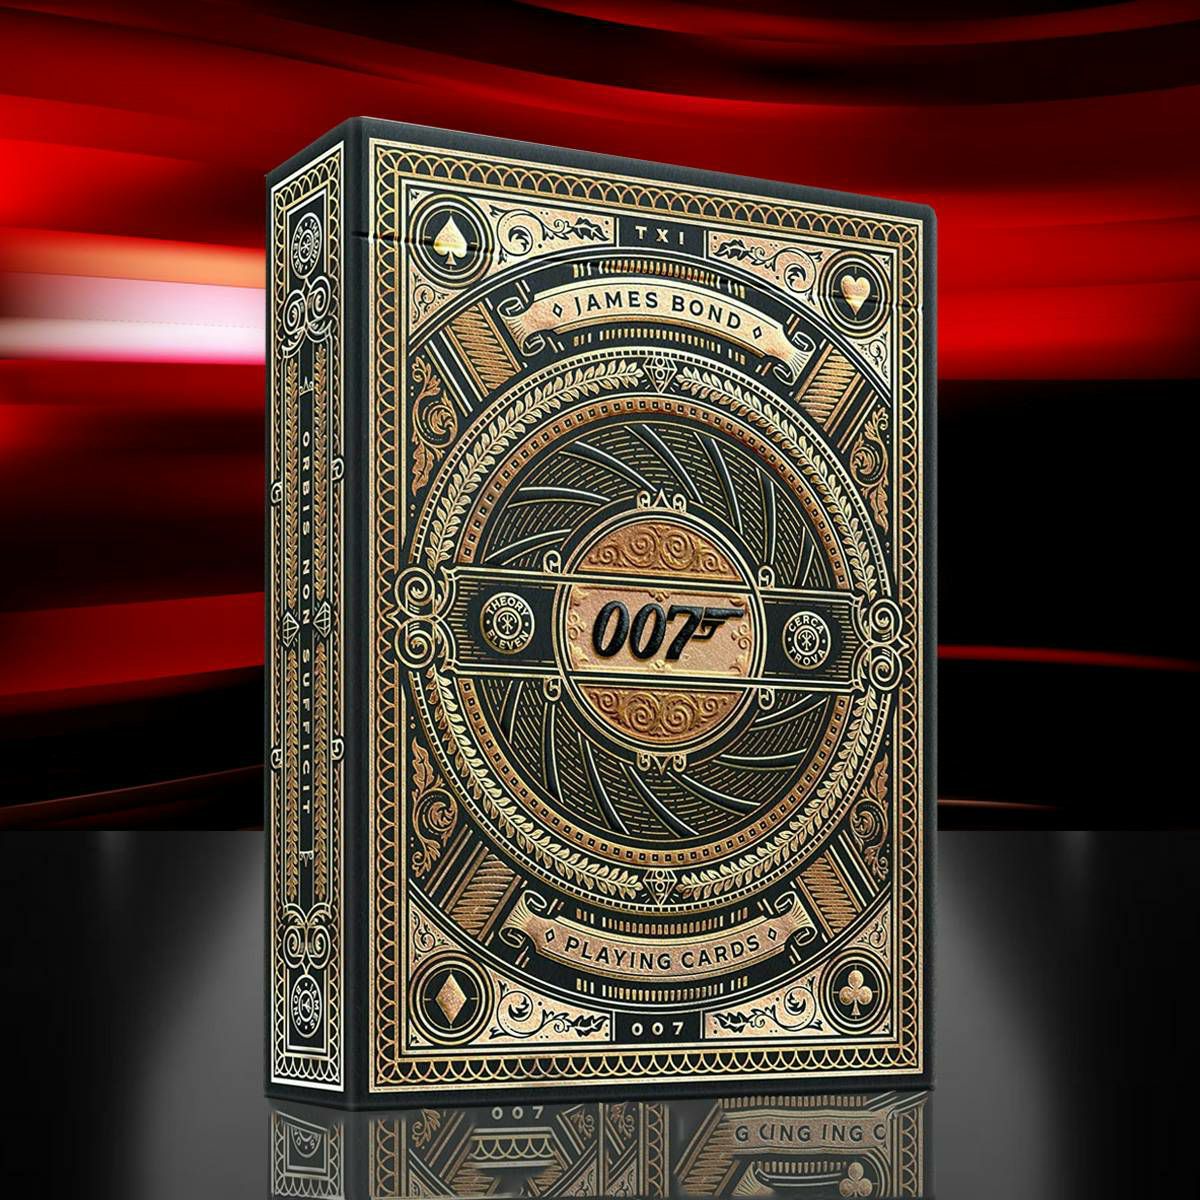 007 Playing Cards